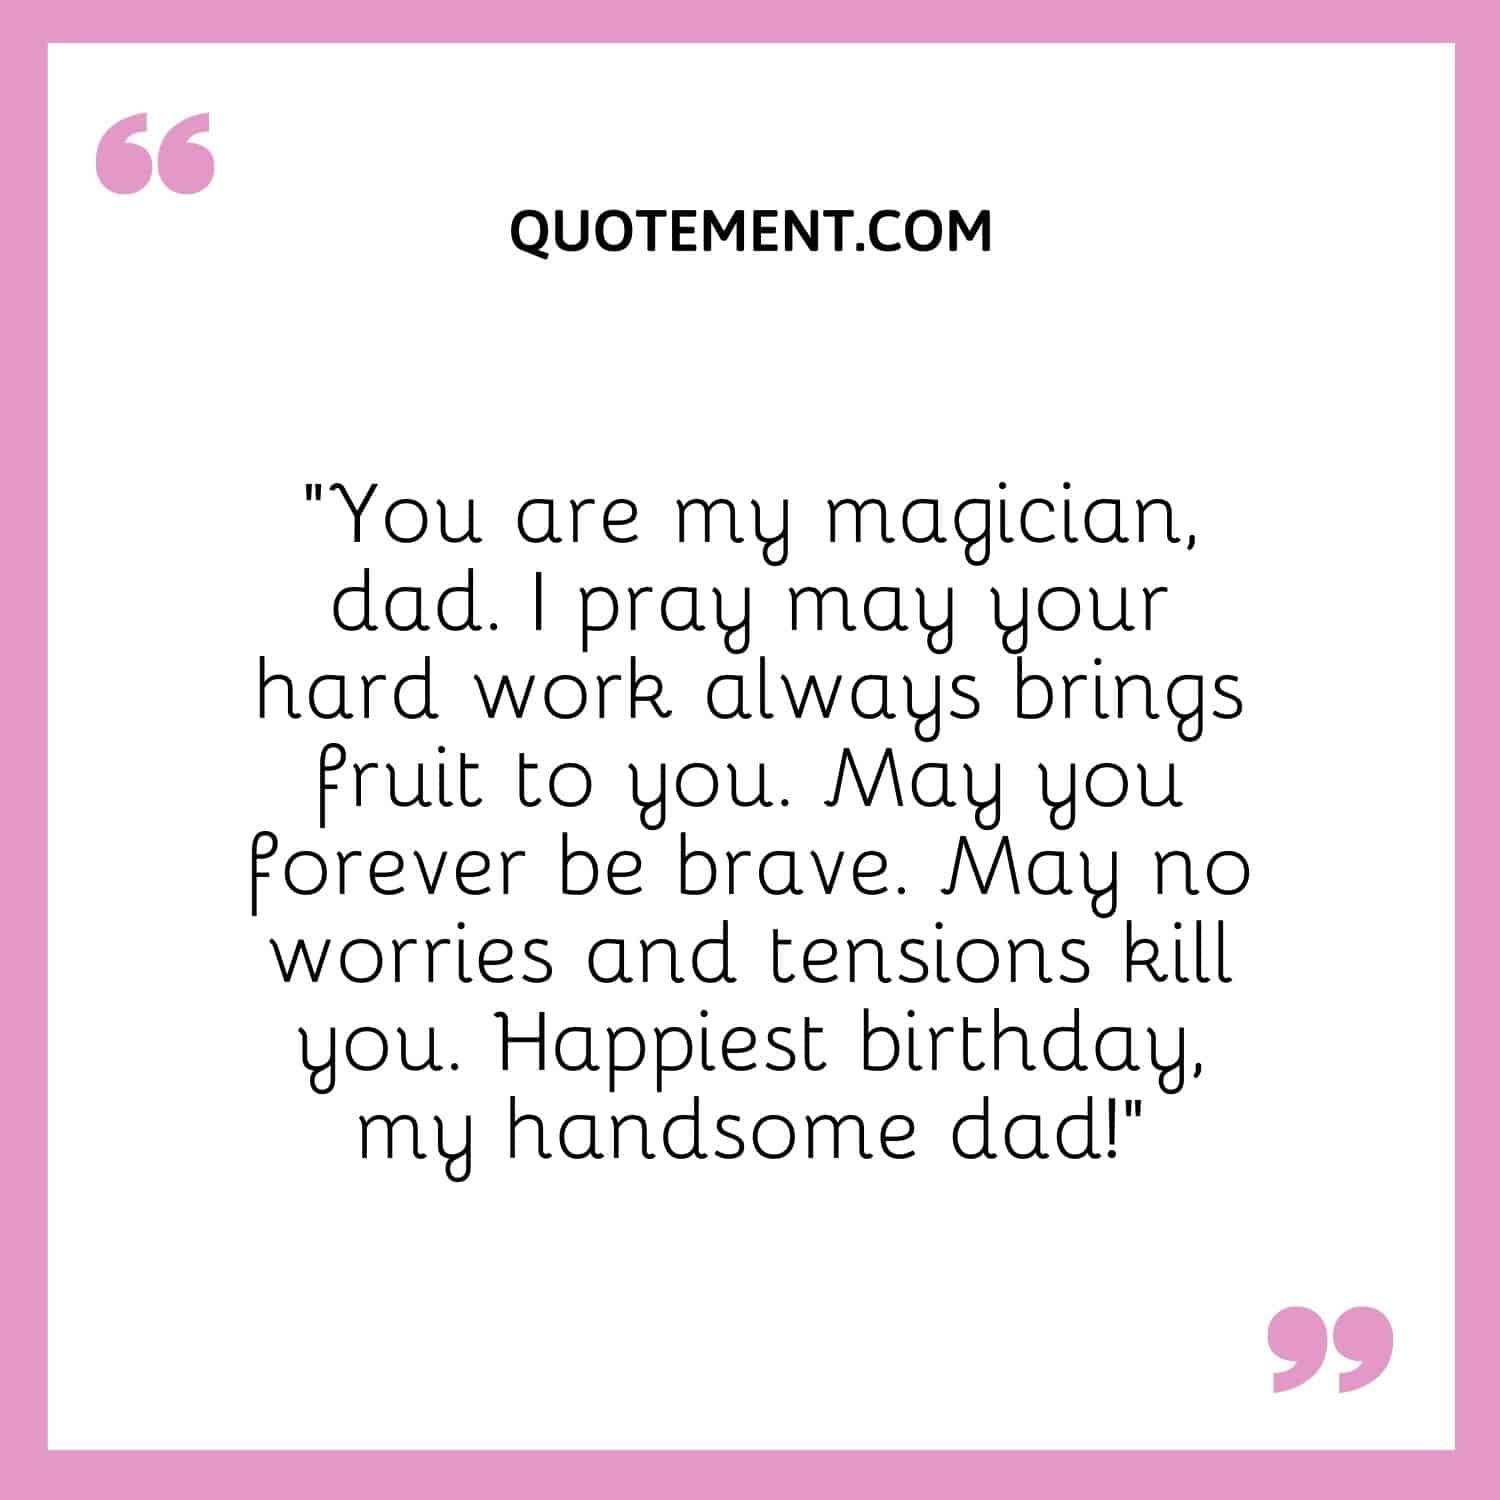 You are my magician, dad